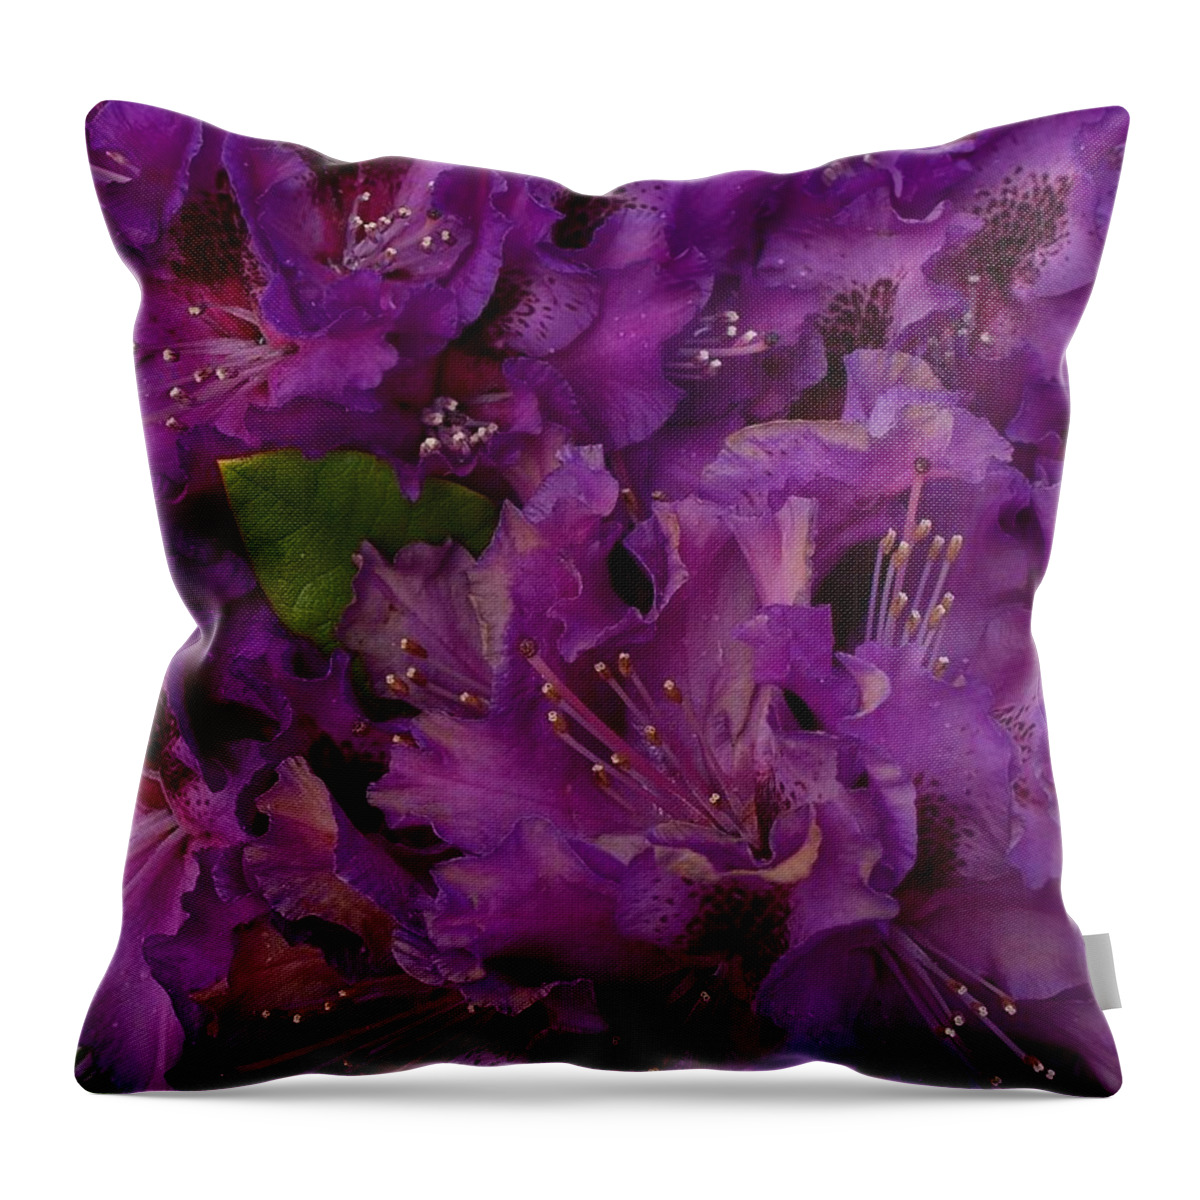 Rhododendron Throw Pillow featuring the photograph Purple Splendor by Evelyn Tambour